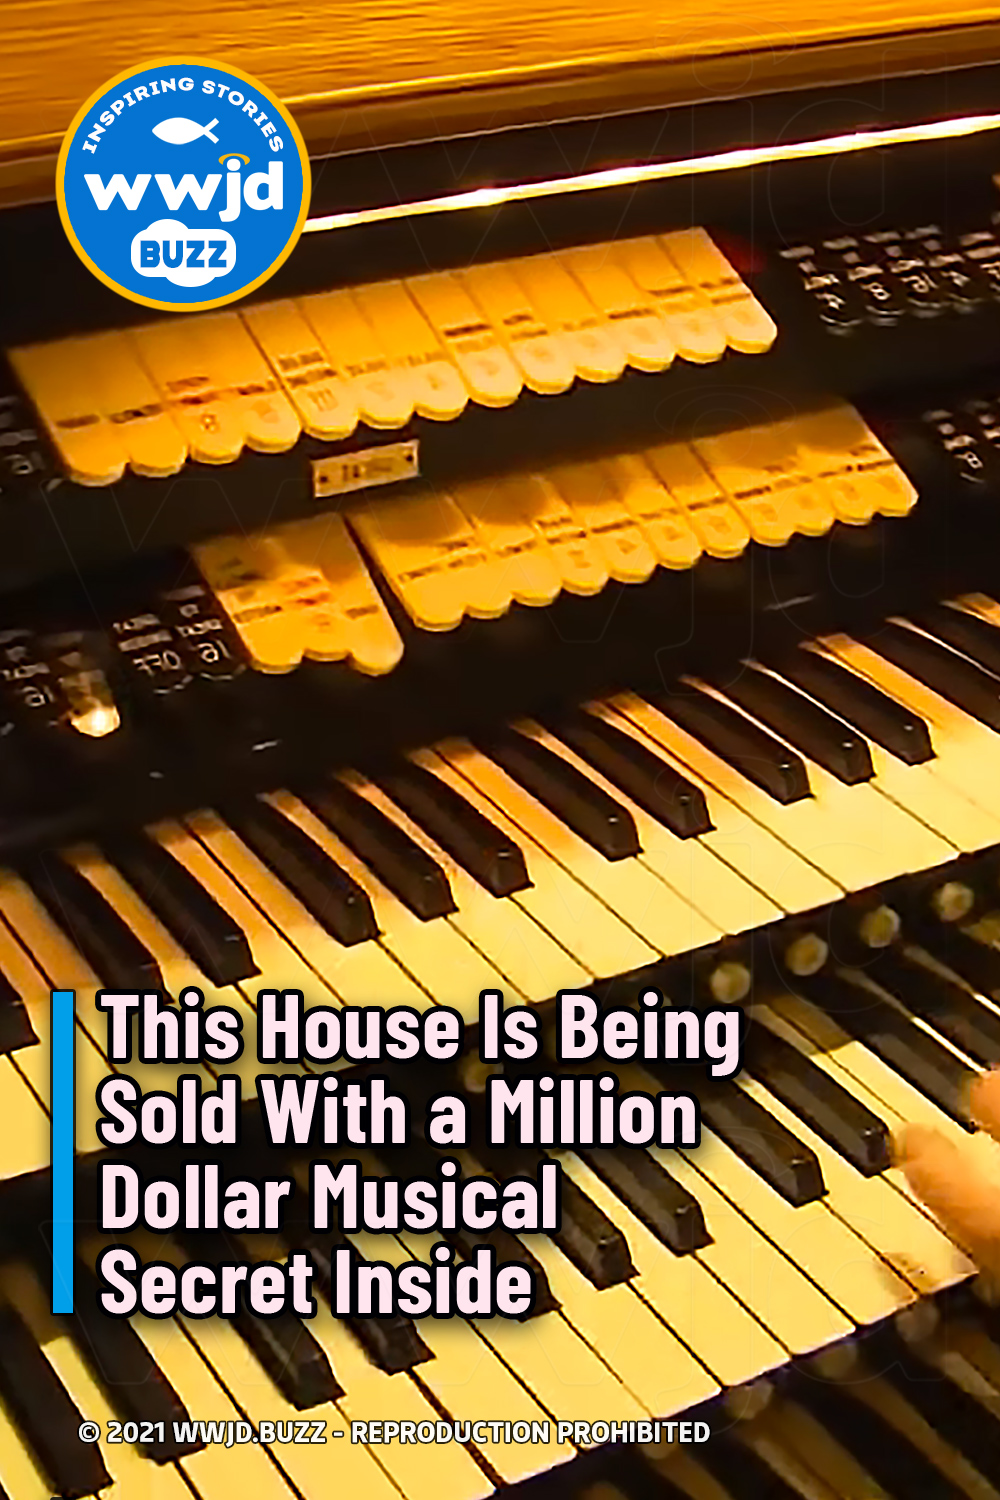 This House Is Being Sold With a Million Dollar Musical Secret Inside